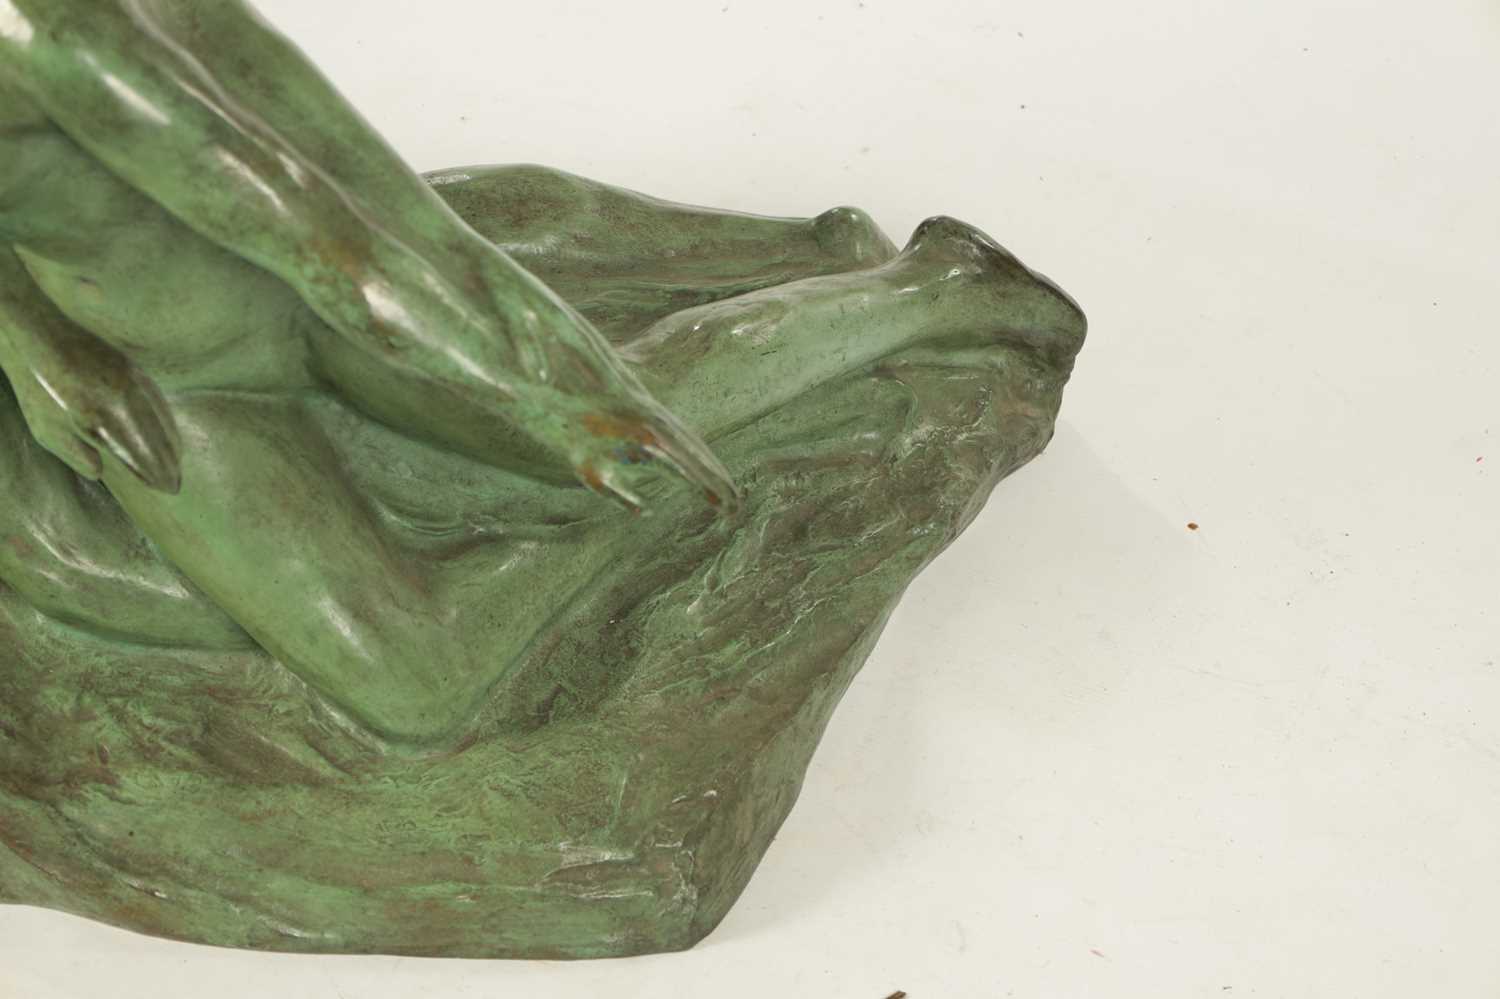 EUGENE CANNEEL (BELGIAN, BORN 1882). AN EARLY 20TH CENTURY PATINATED GREEN BRONZE SCULPTURE - Image 3 of 5